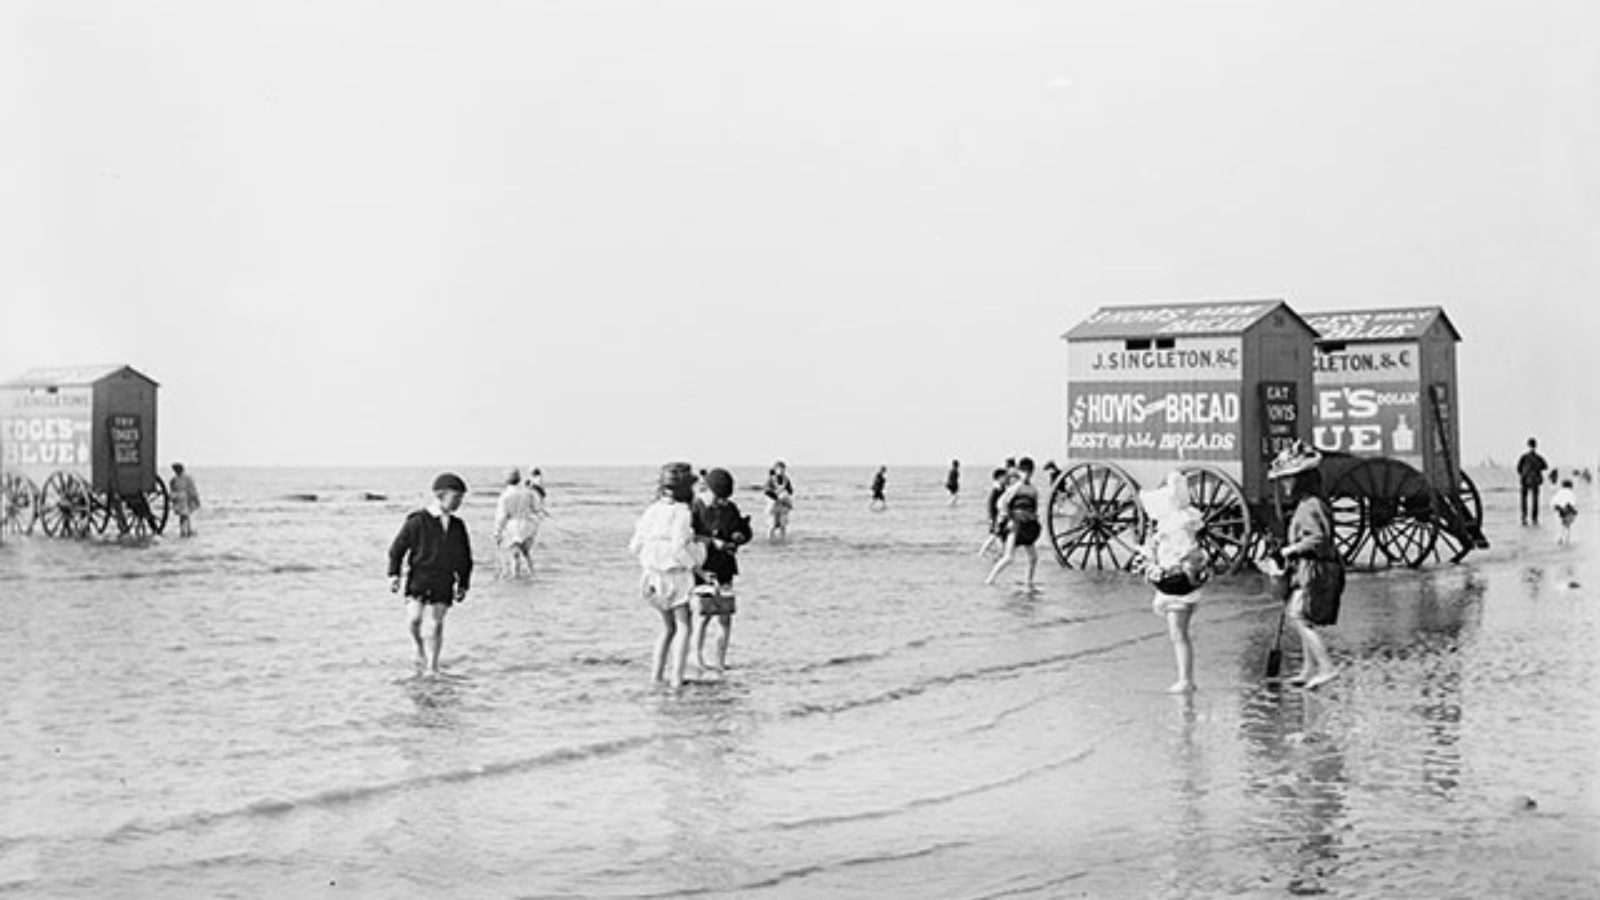 Children and bathing machines on the beach, with advertisements for 'J. Singleton & Co' and 'Hovis Bread: the best of all breads.'